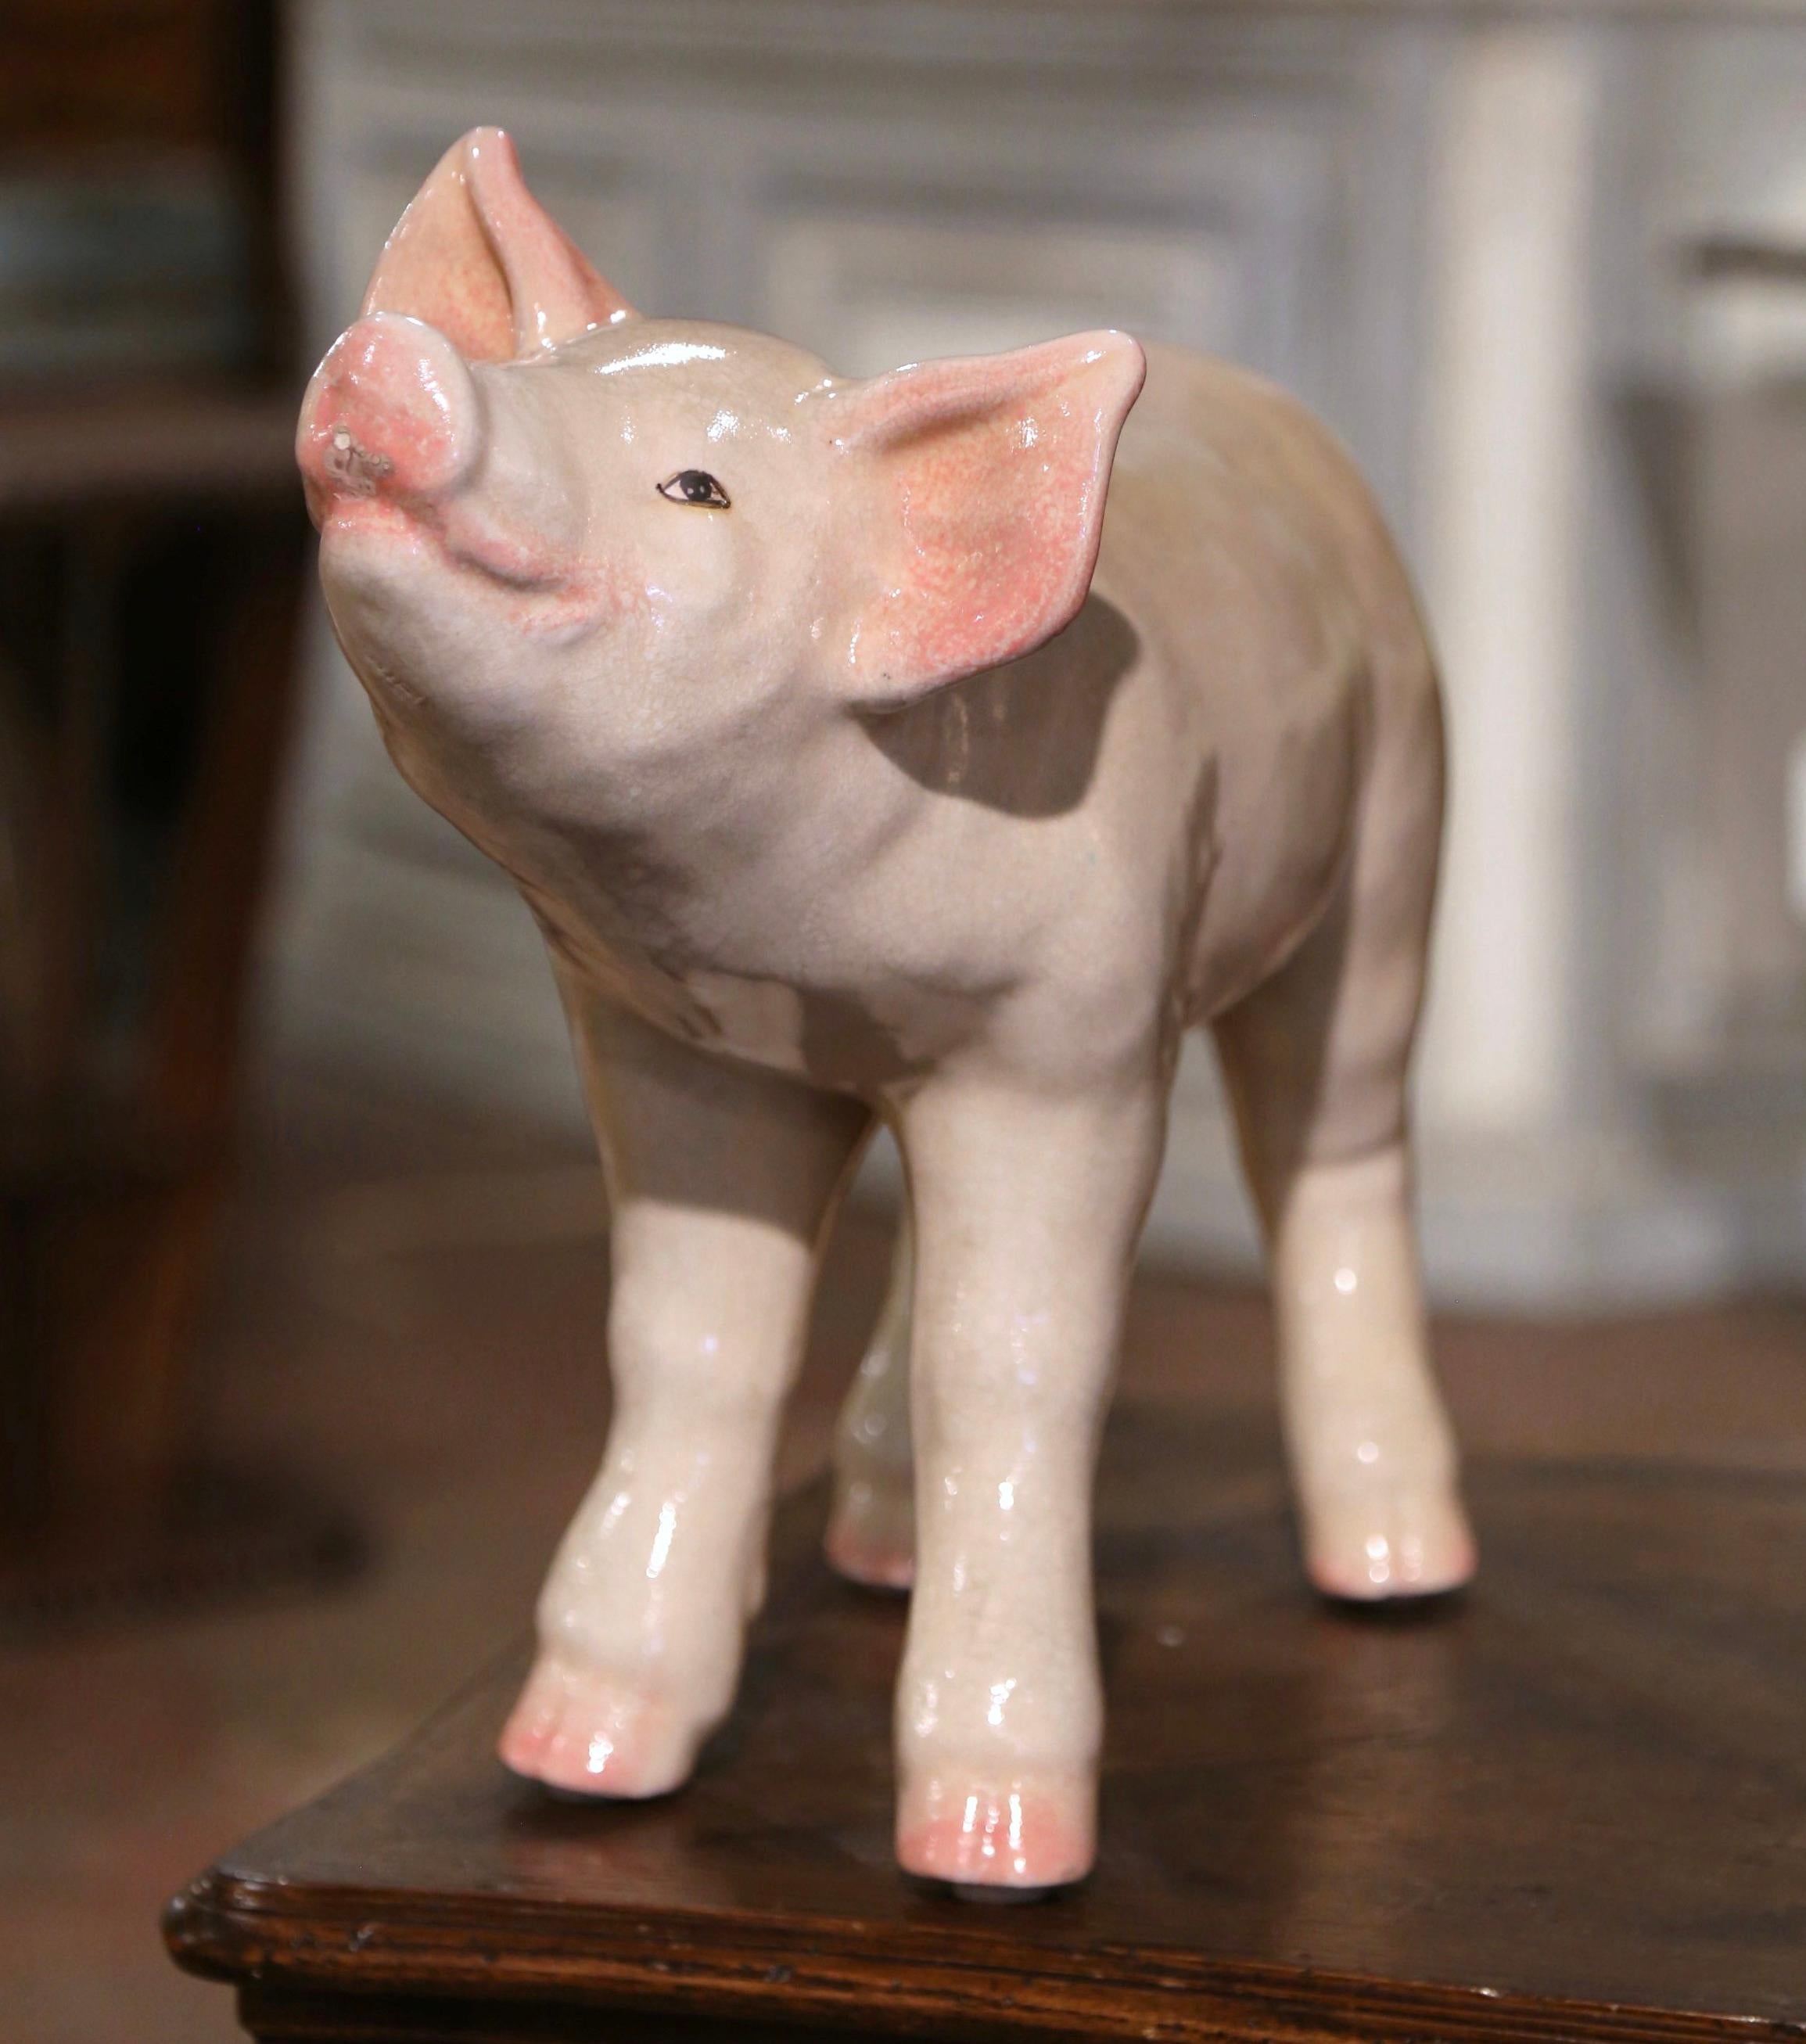 Late 20th Century Crackled Ceramic Pig Sculpture Attributed to Townsend 1